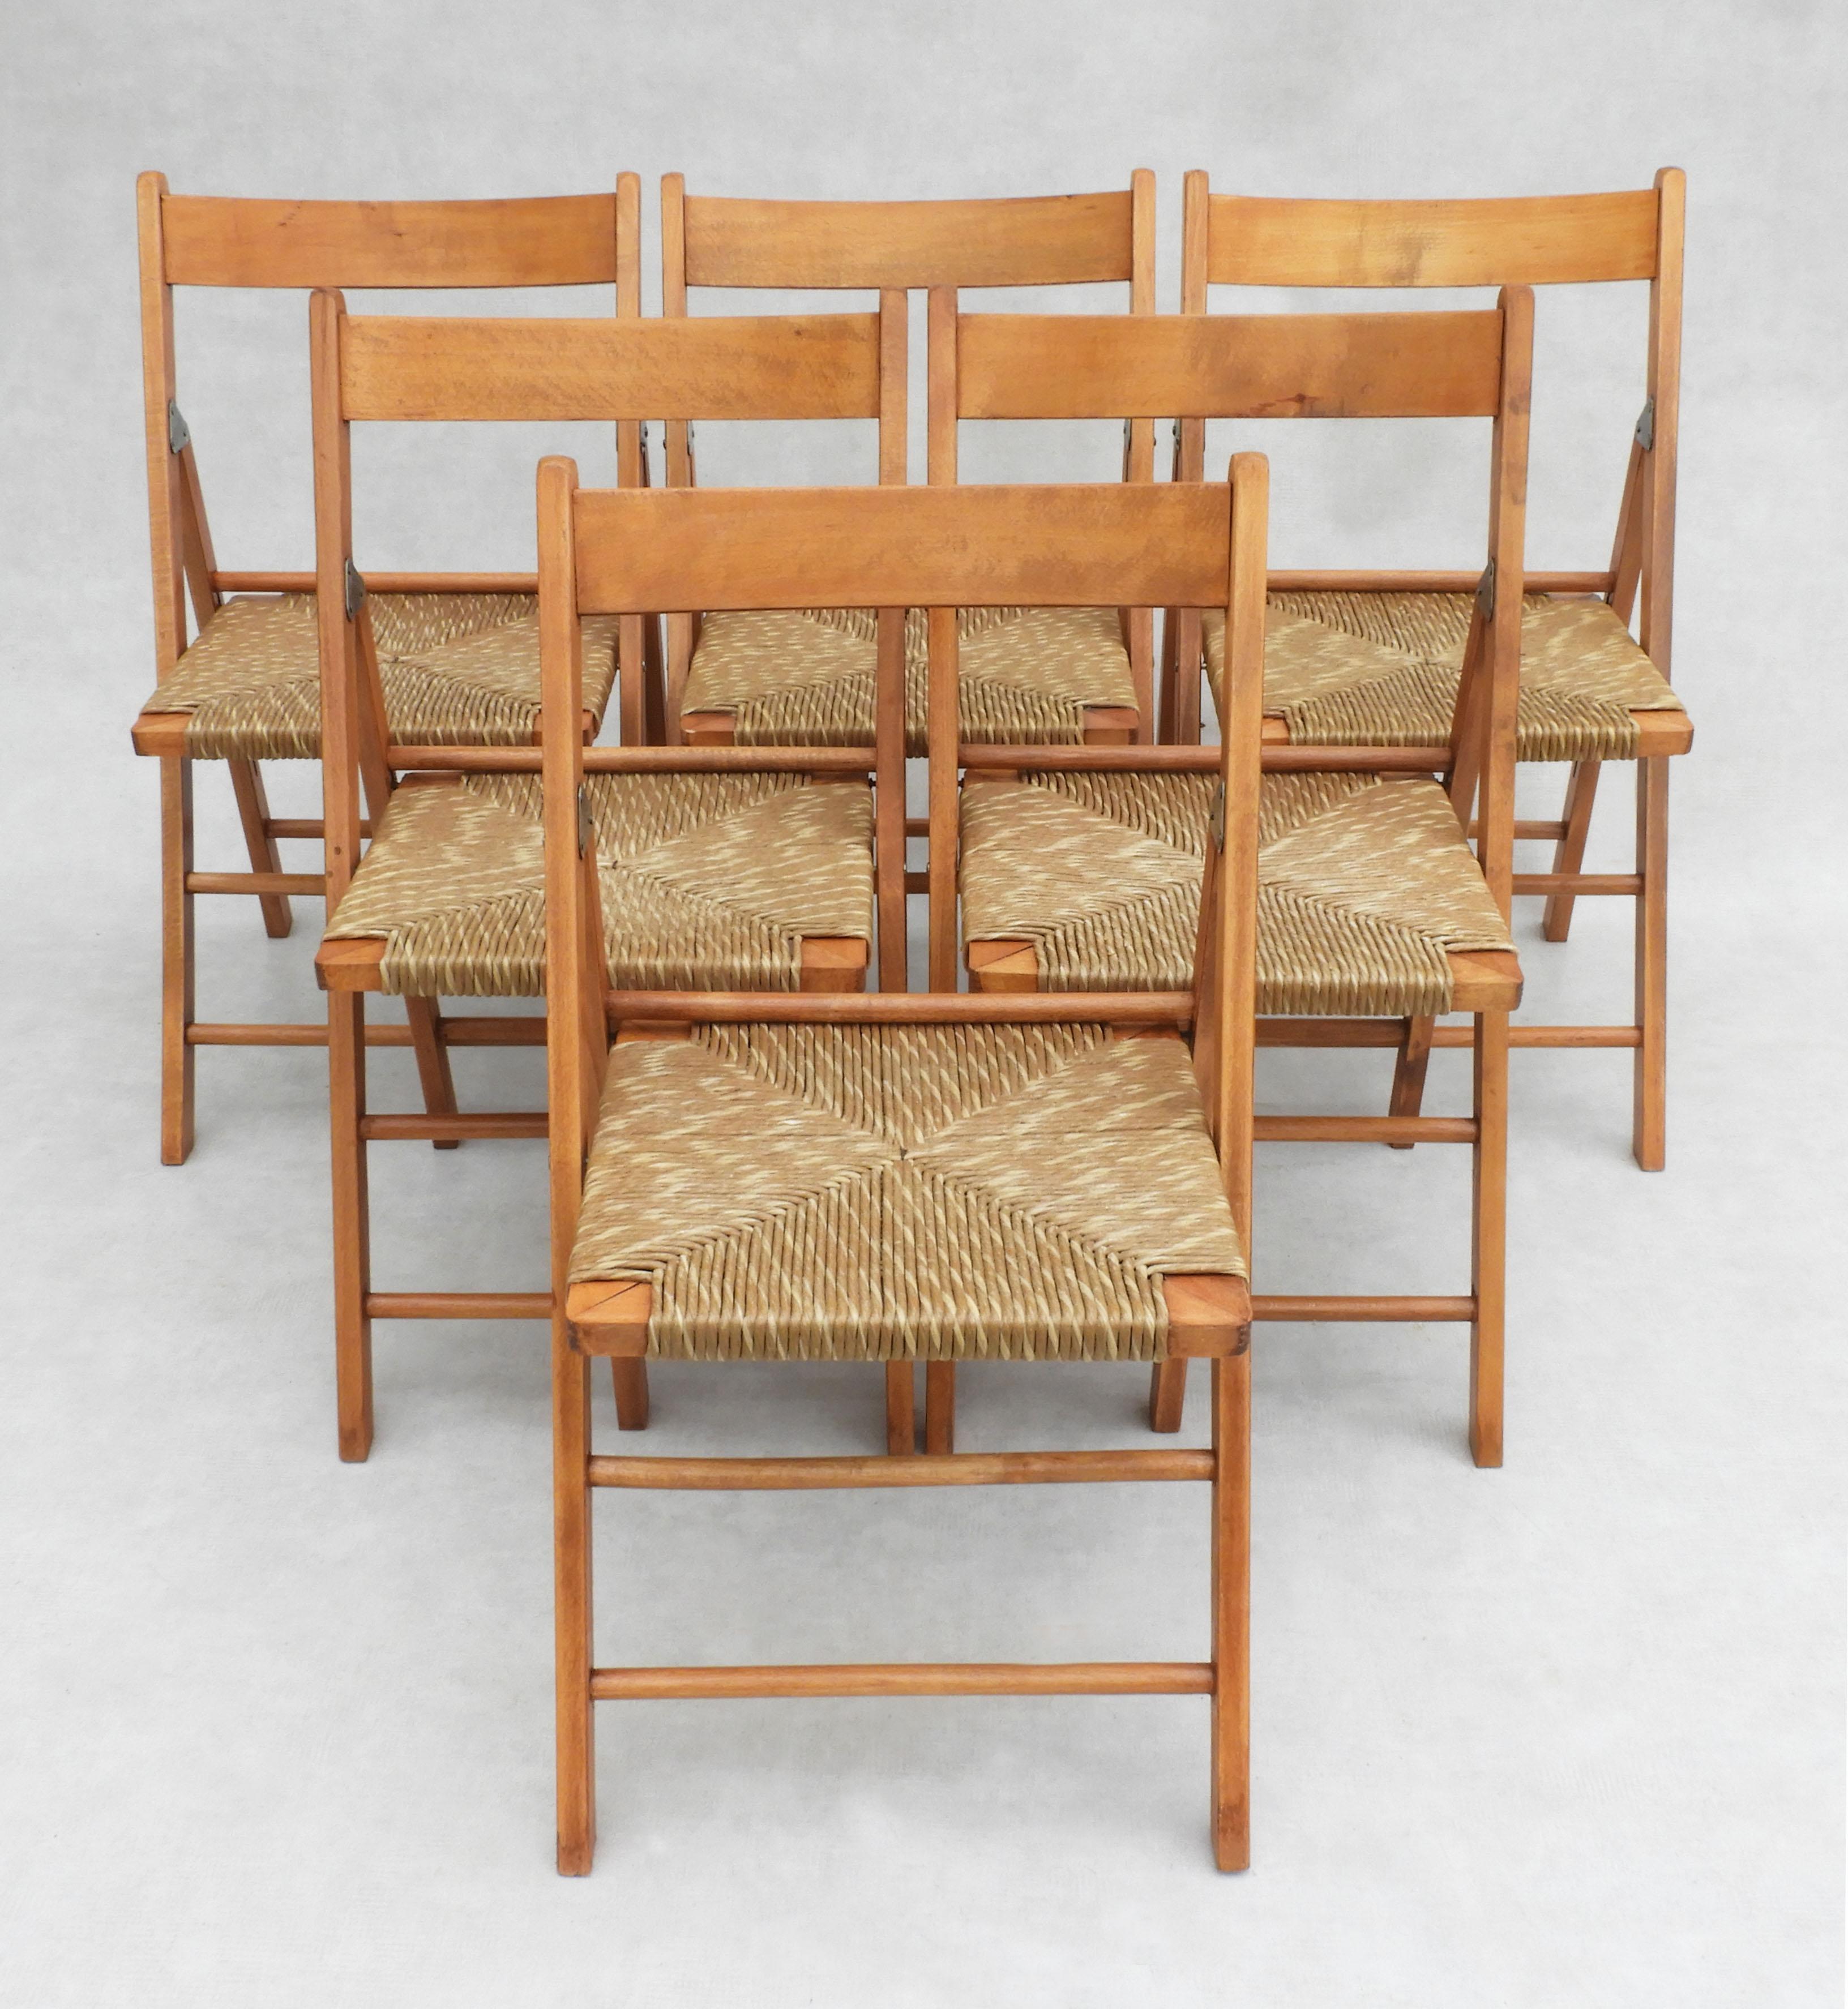 Vintage Beech Folding Chairs with Woven Paper Cord Seats C1970s France, Set of 6 For Sale 5